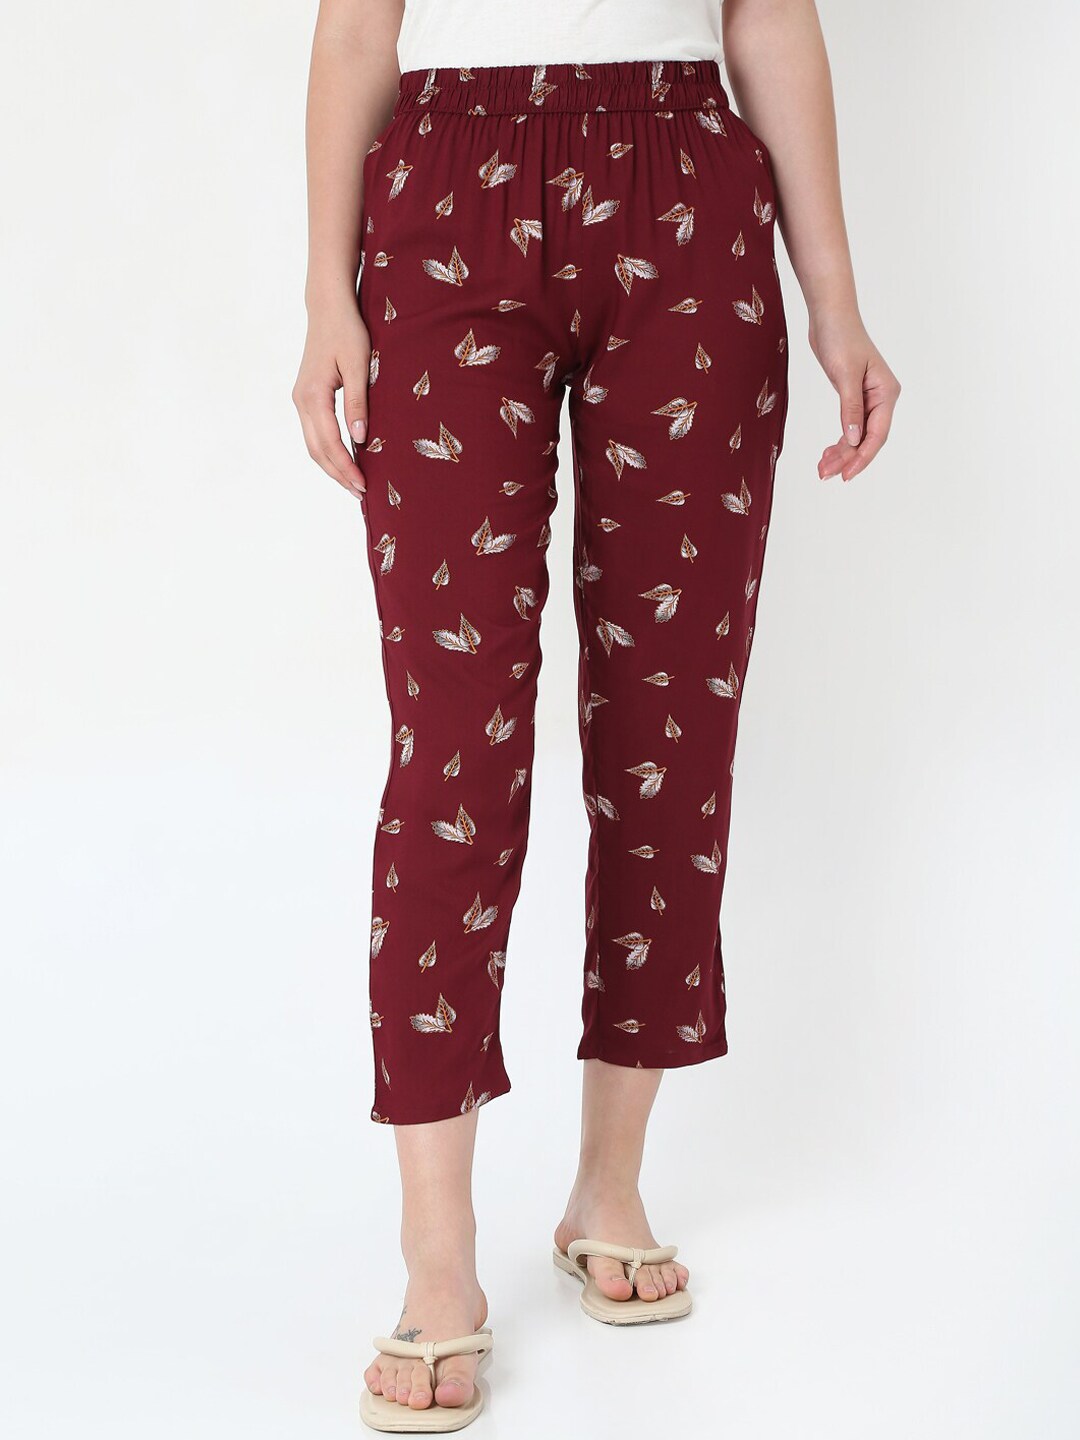 Smarty Pants Women Maroon Floral Printed Cotton Pyjamas Price in India